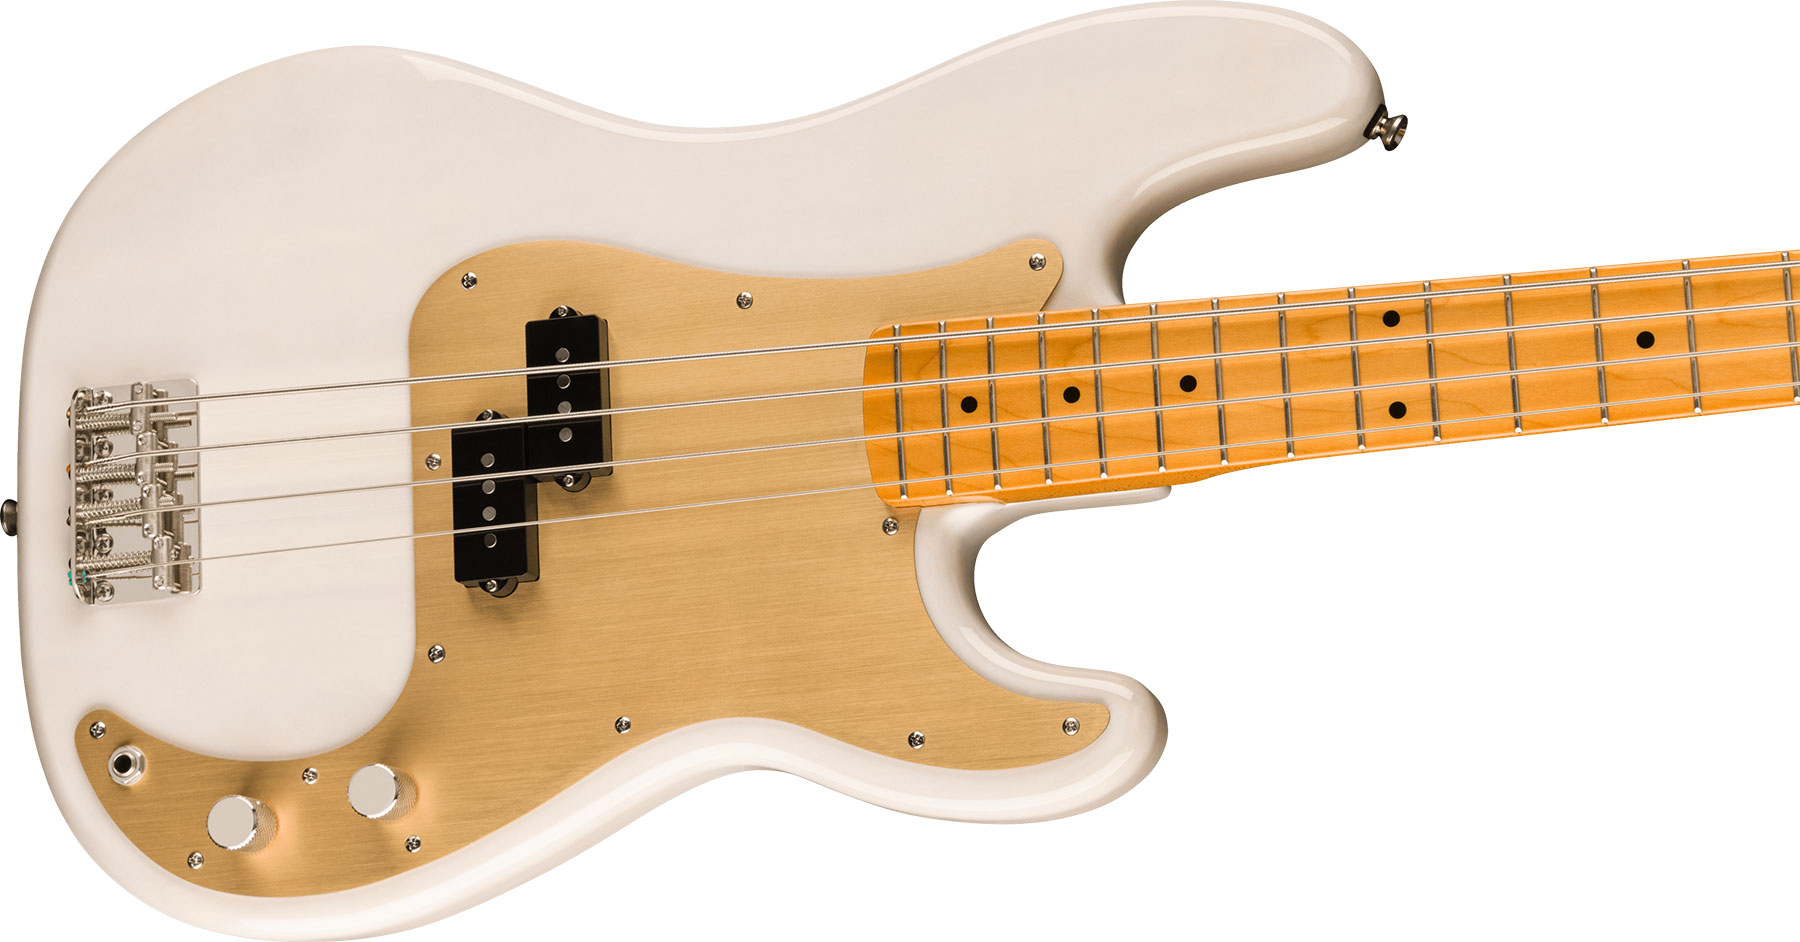 Squier Precision Bass Late '50s Classic Vibe Fsr Ltd Mn - White Blonde - Solid body electric bass - Variation 2